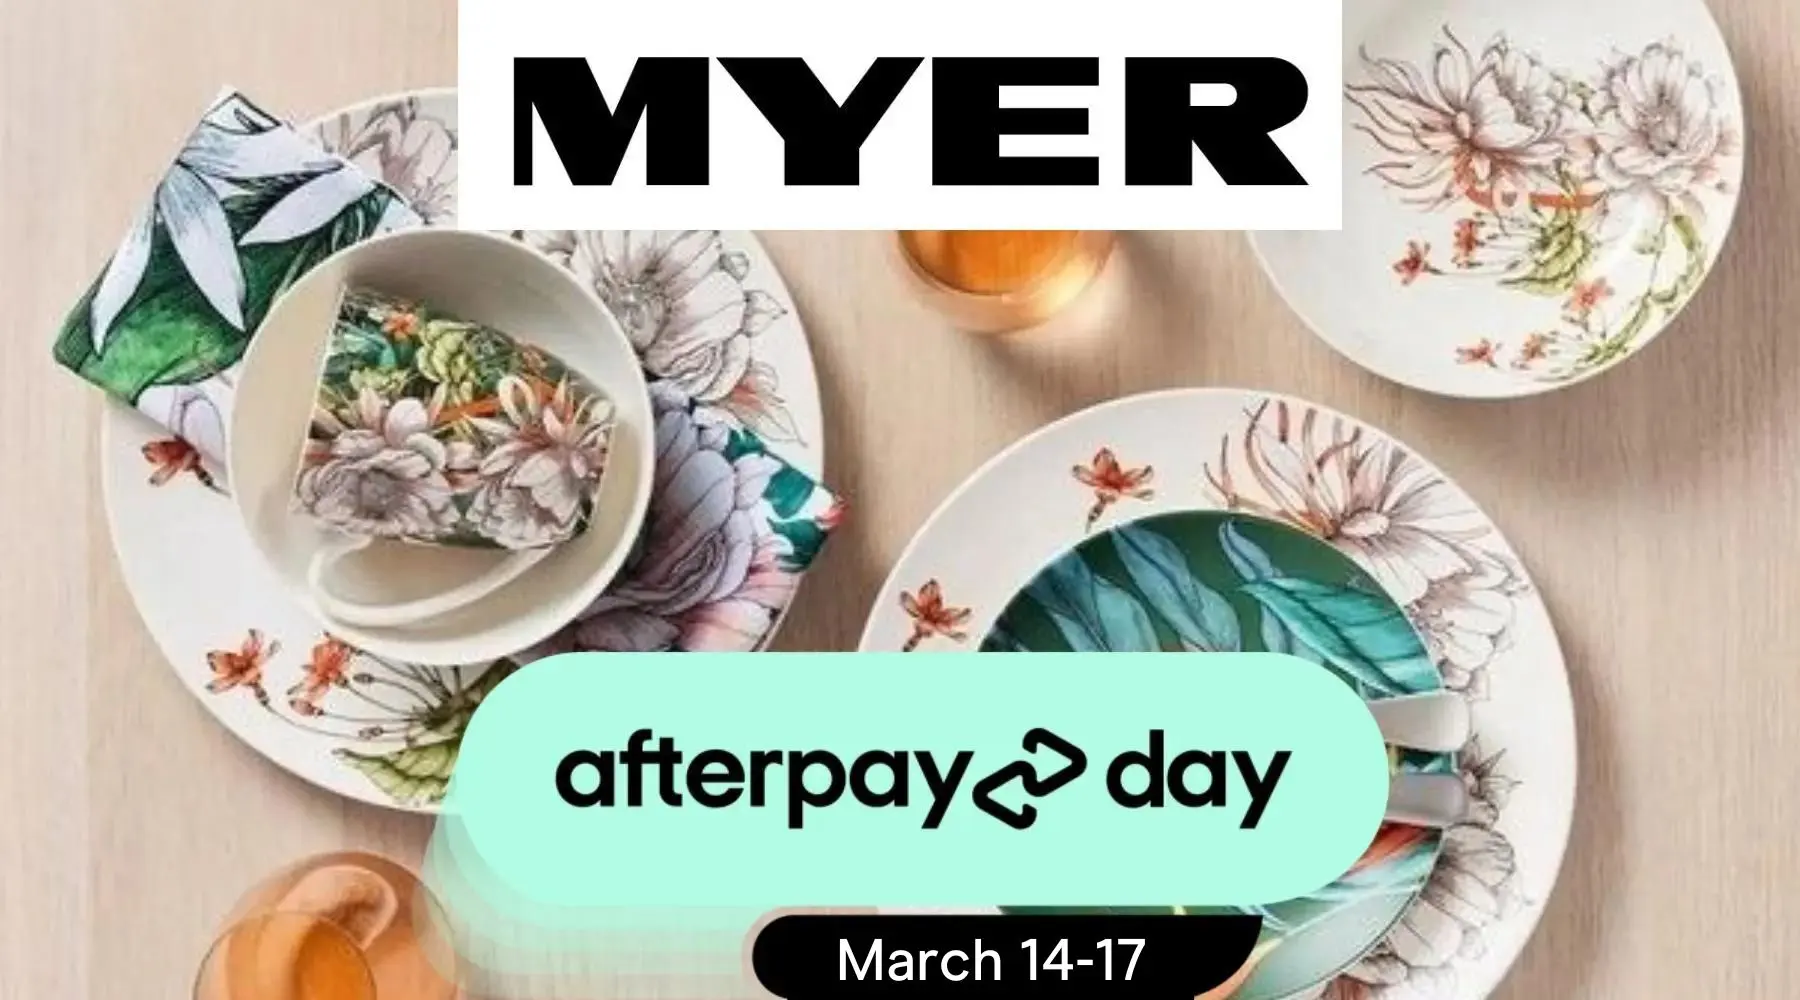 Myer Afterpay Day sale_Supplied_1800x1000